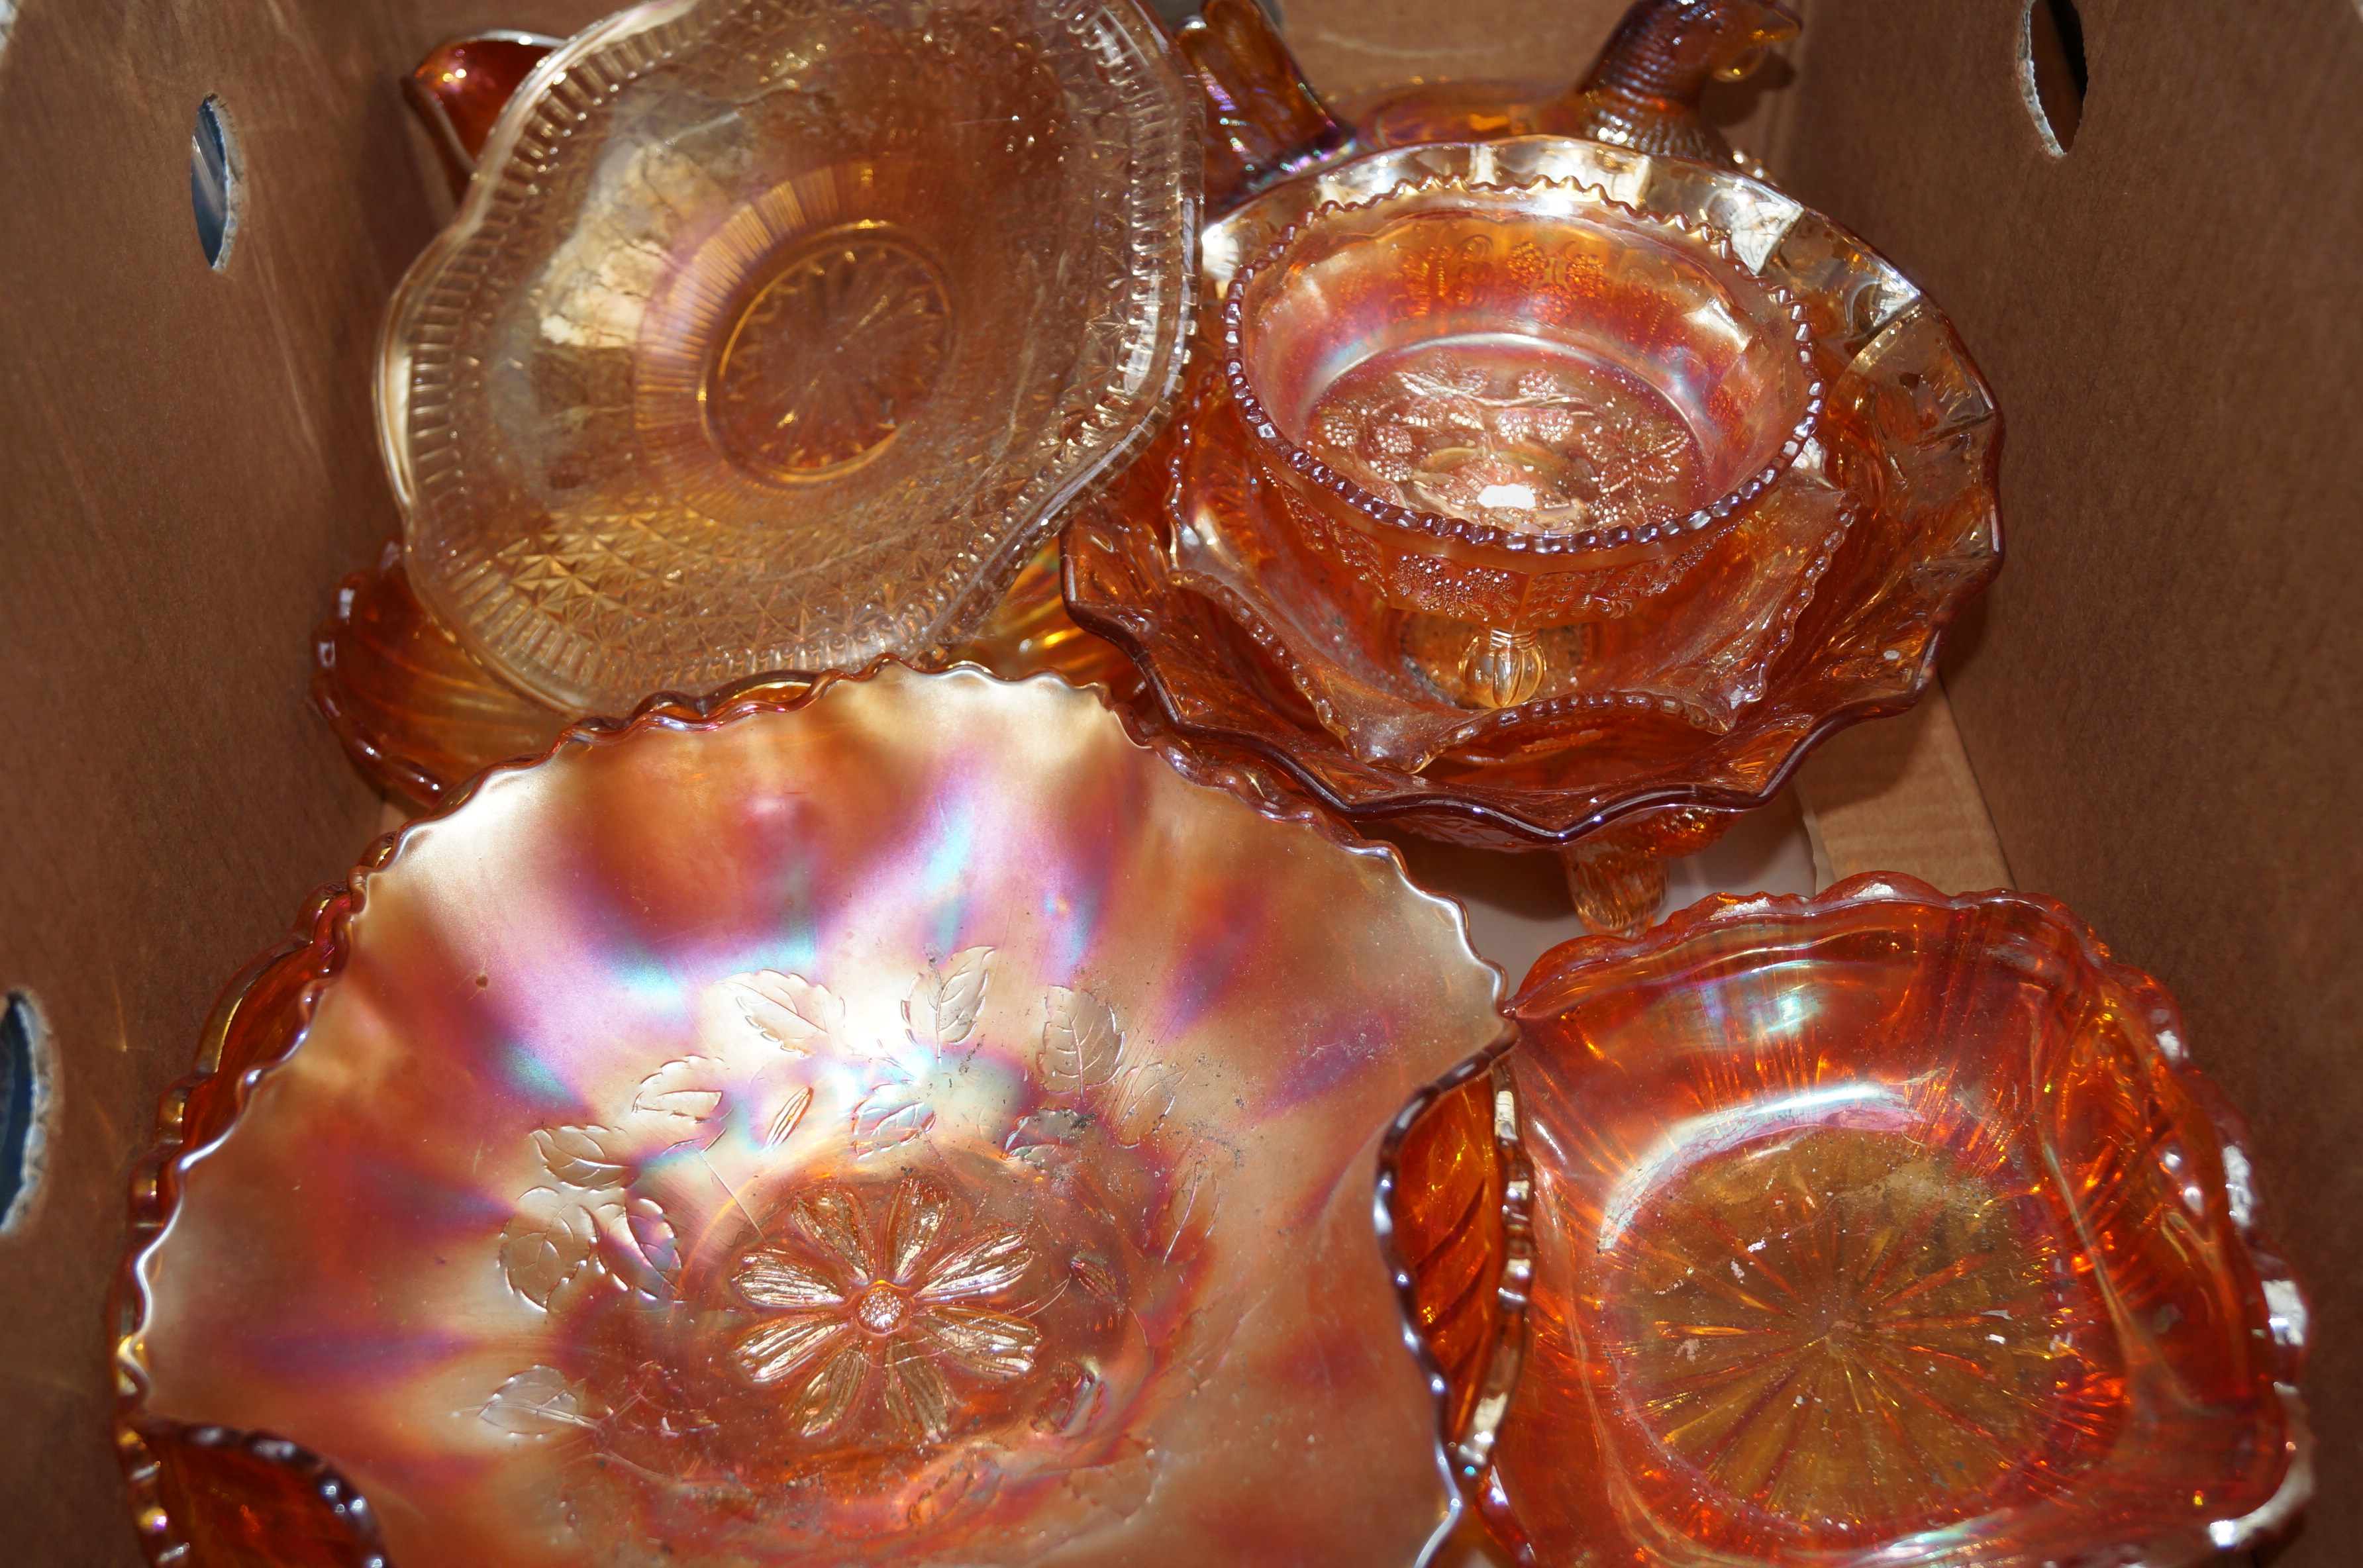 Large collection of carnival glass